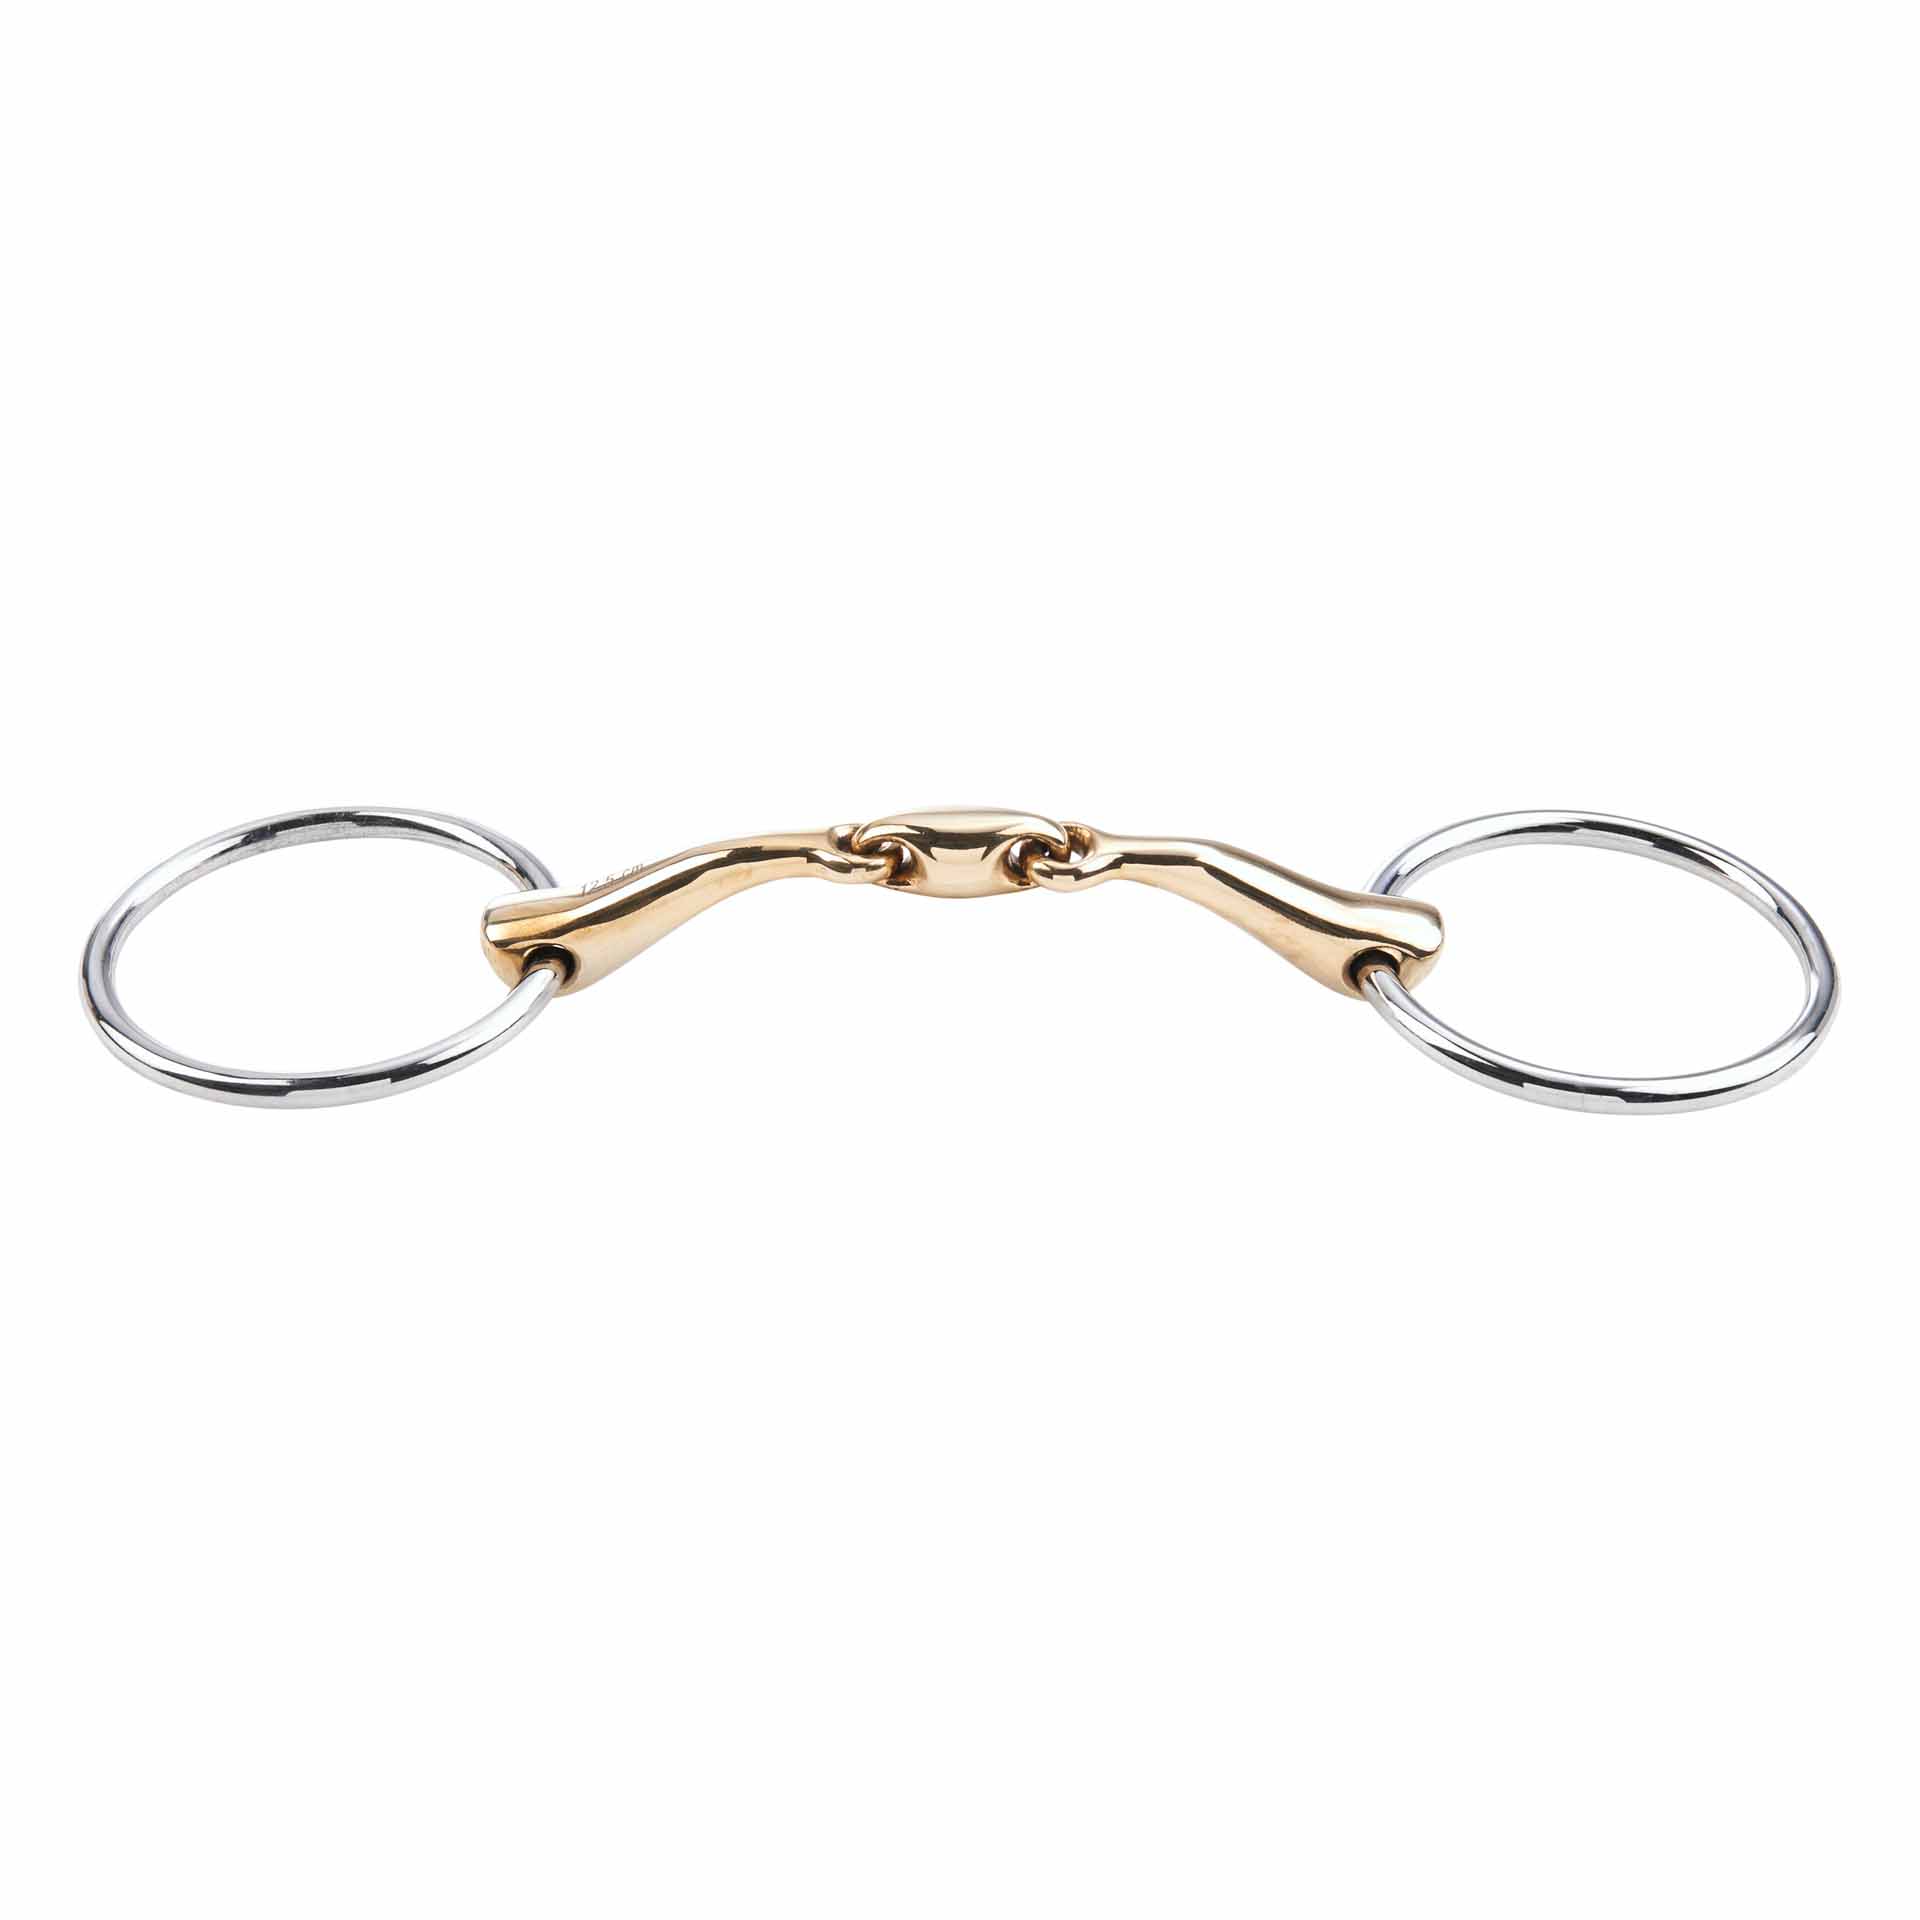 BUSSE Snaffle Bit KAUGAN®-SHAPED 14 mm, French-Link 11.5 cm/65 mm 